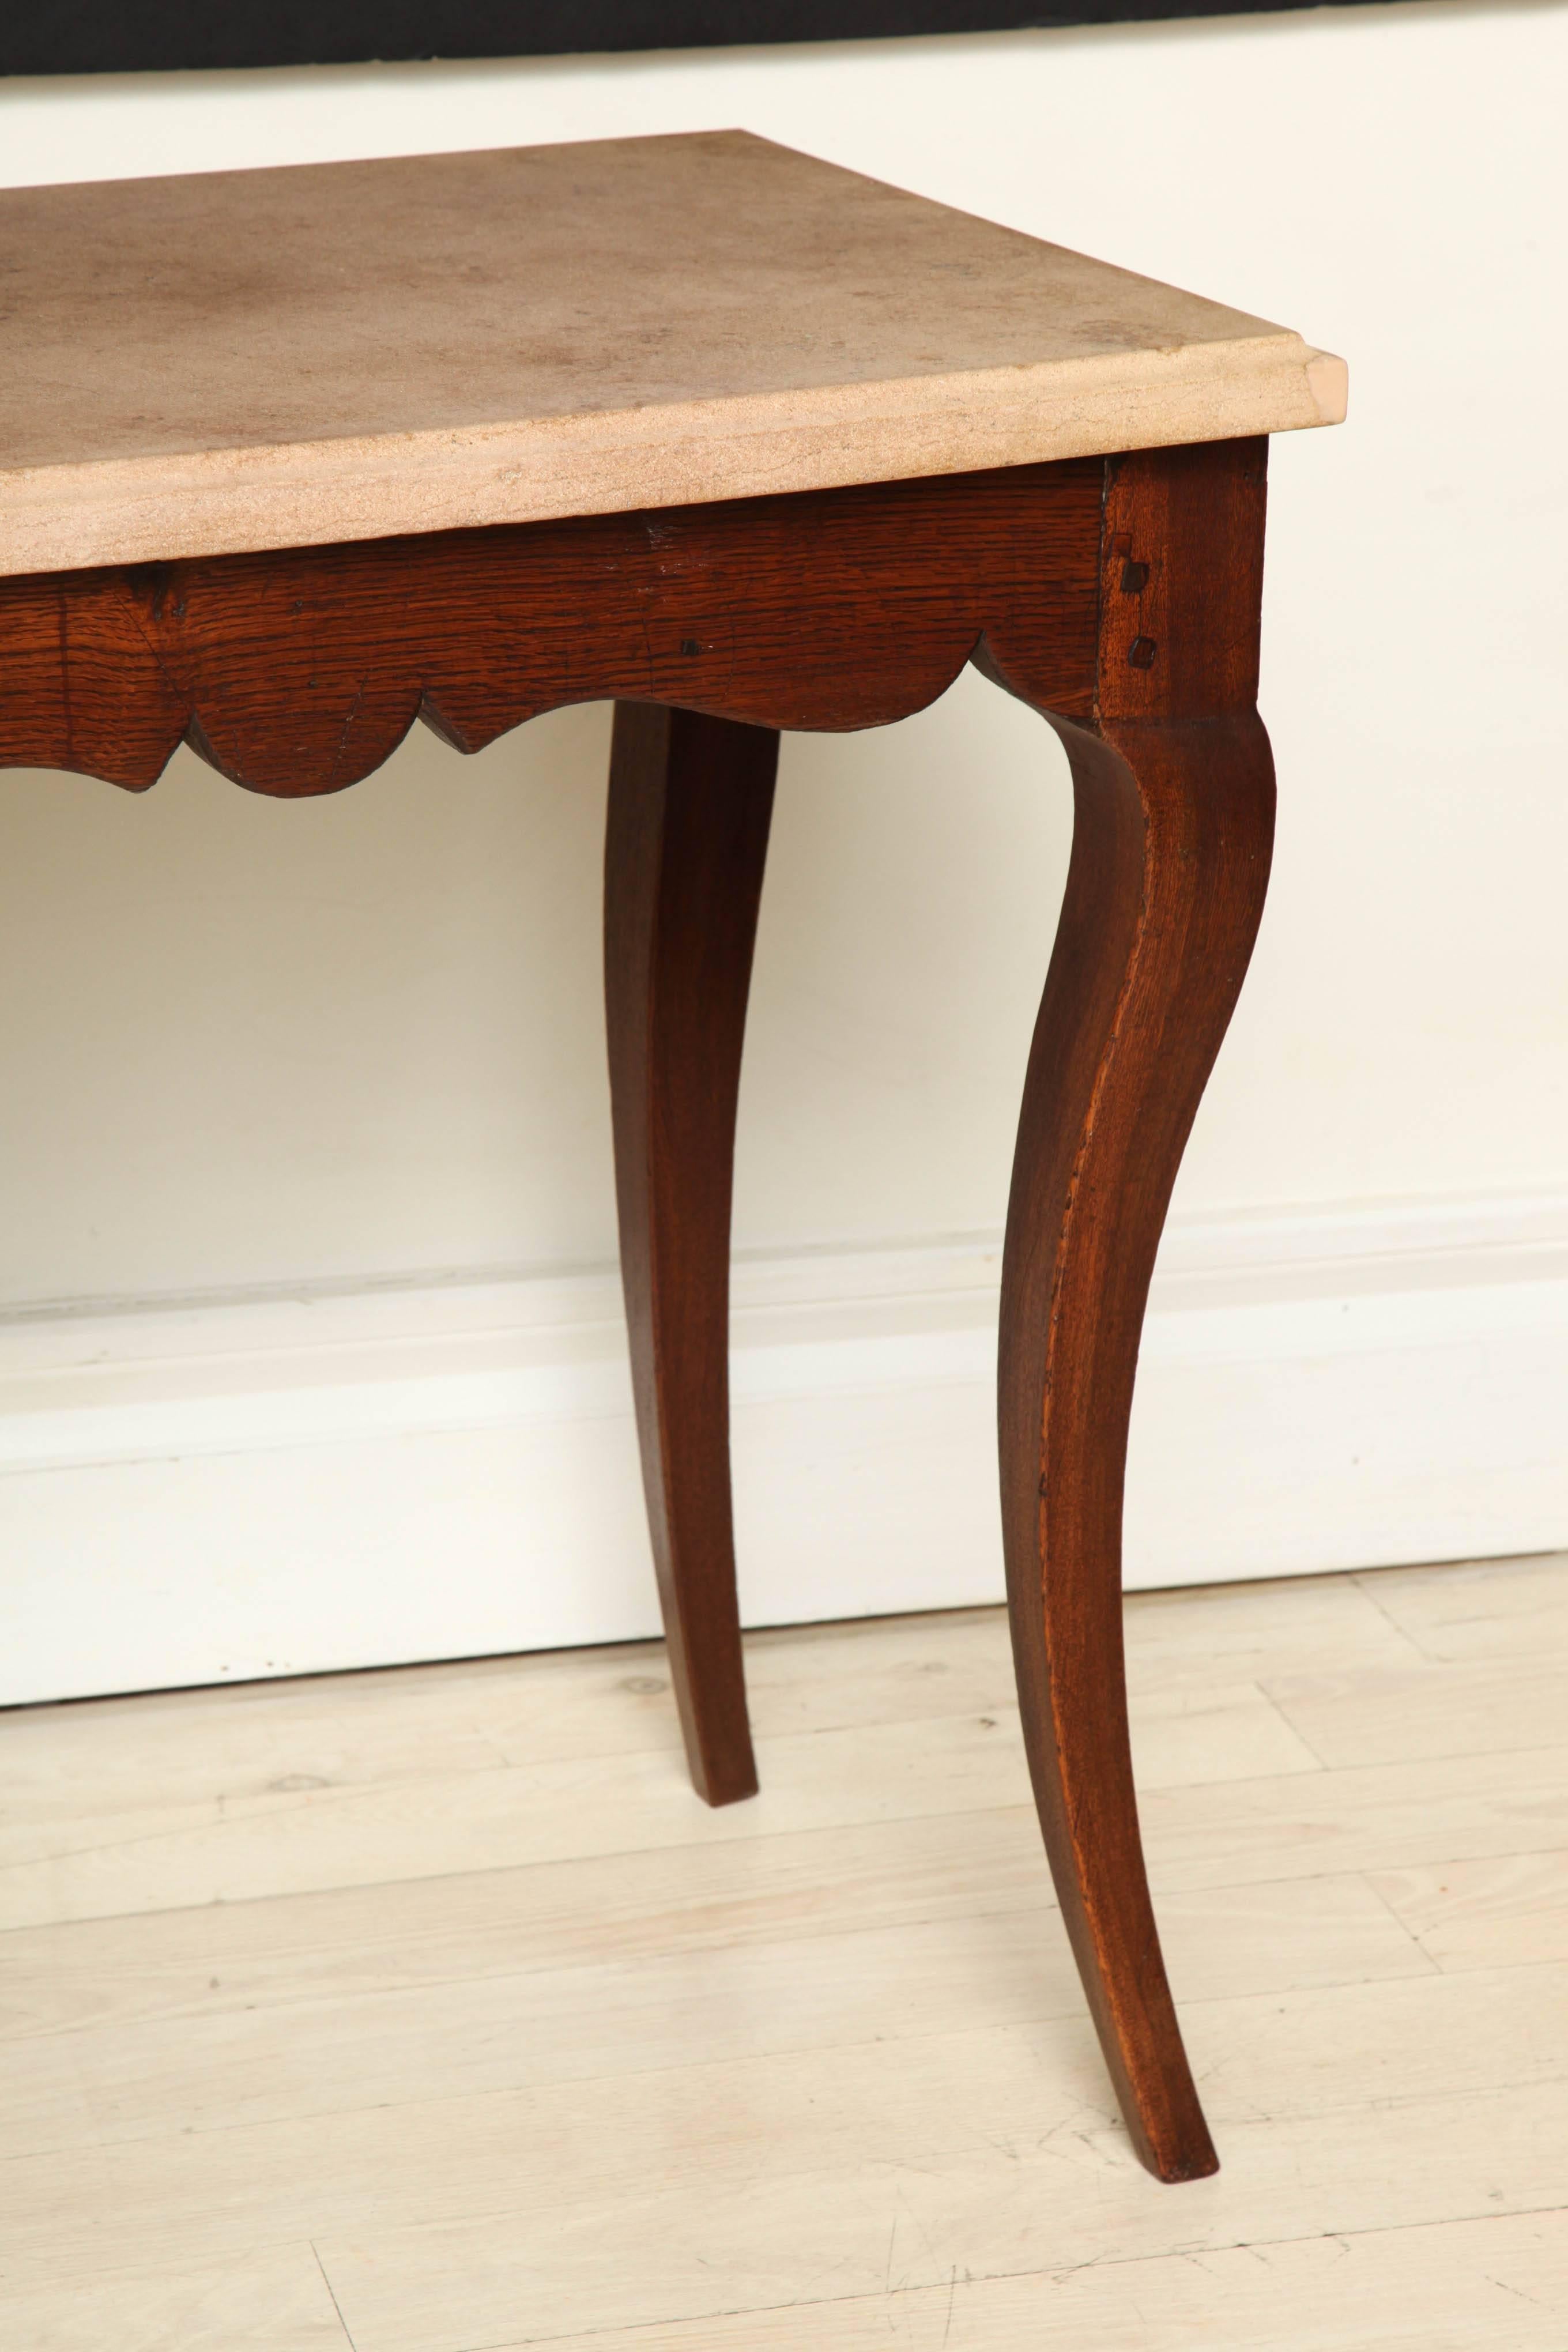 Oak table with shaped apron, cabriole legs and original marble top, Bourgogne, France, 18th century.


Available to see in our NYC Showroom 
BK Antiques
306 East 61st St. 2nd fl.
New York, NY 10065